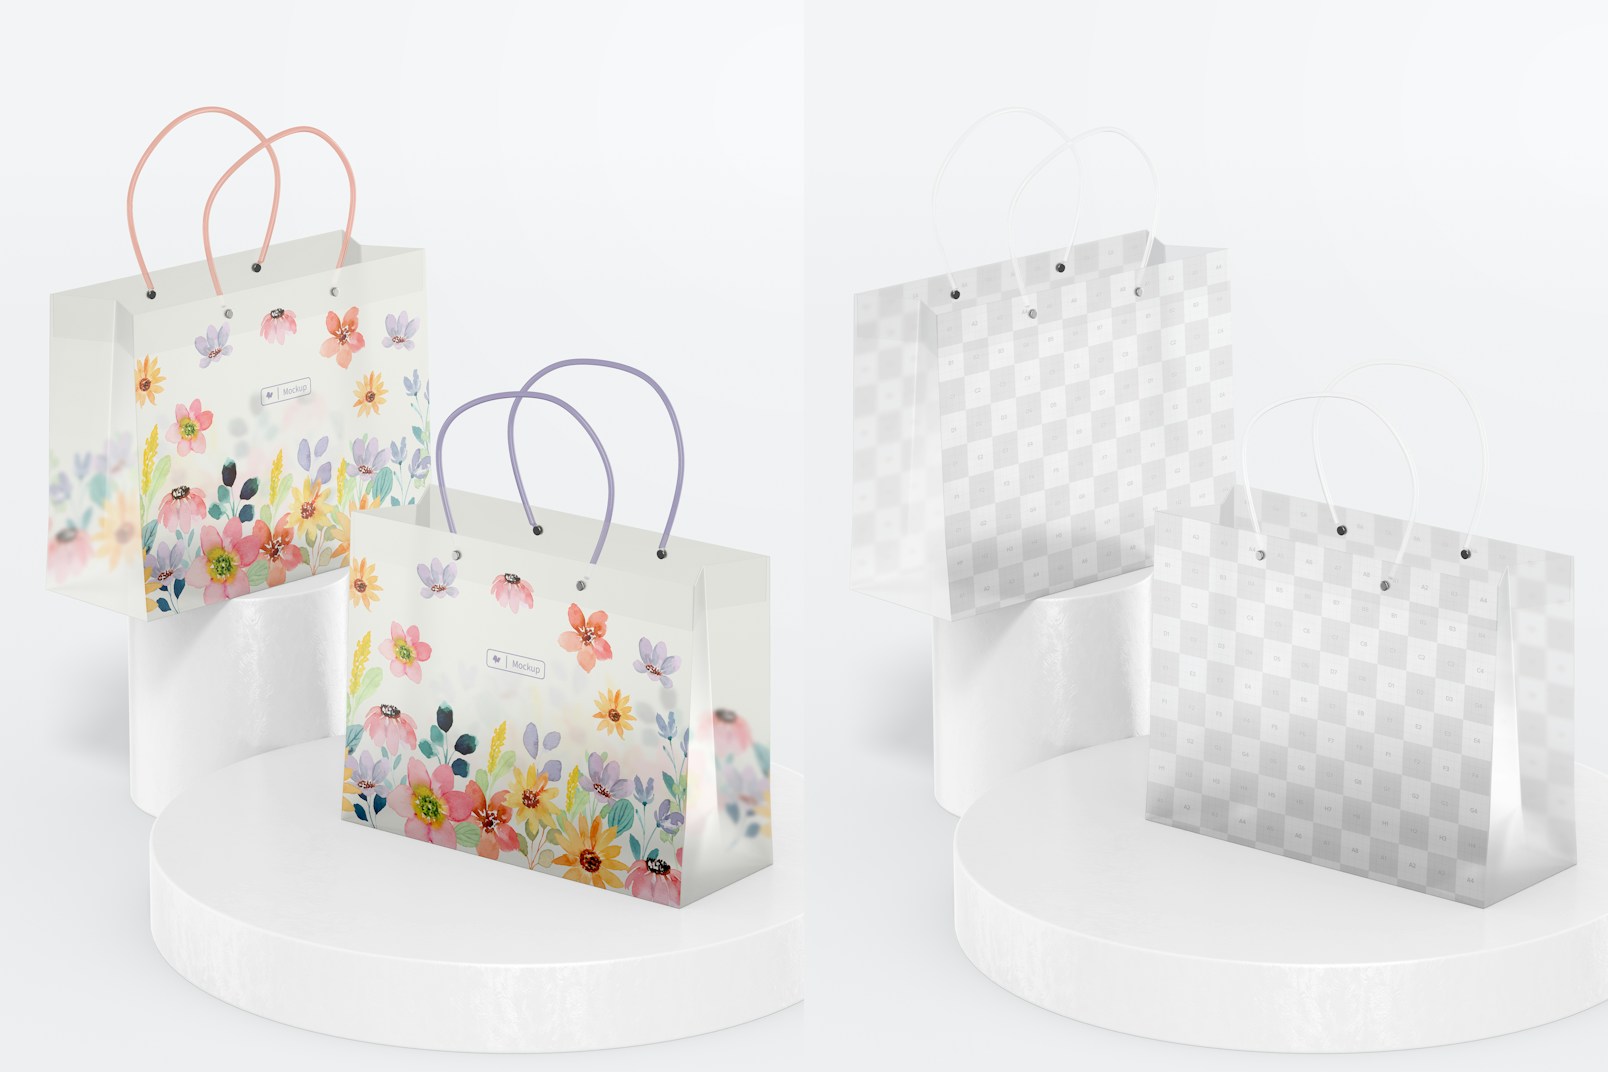 Clear Shopping Bags Mockup, on Podiums